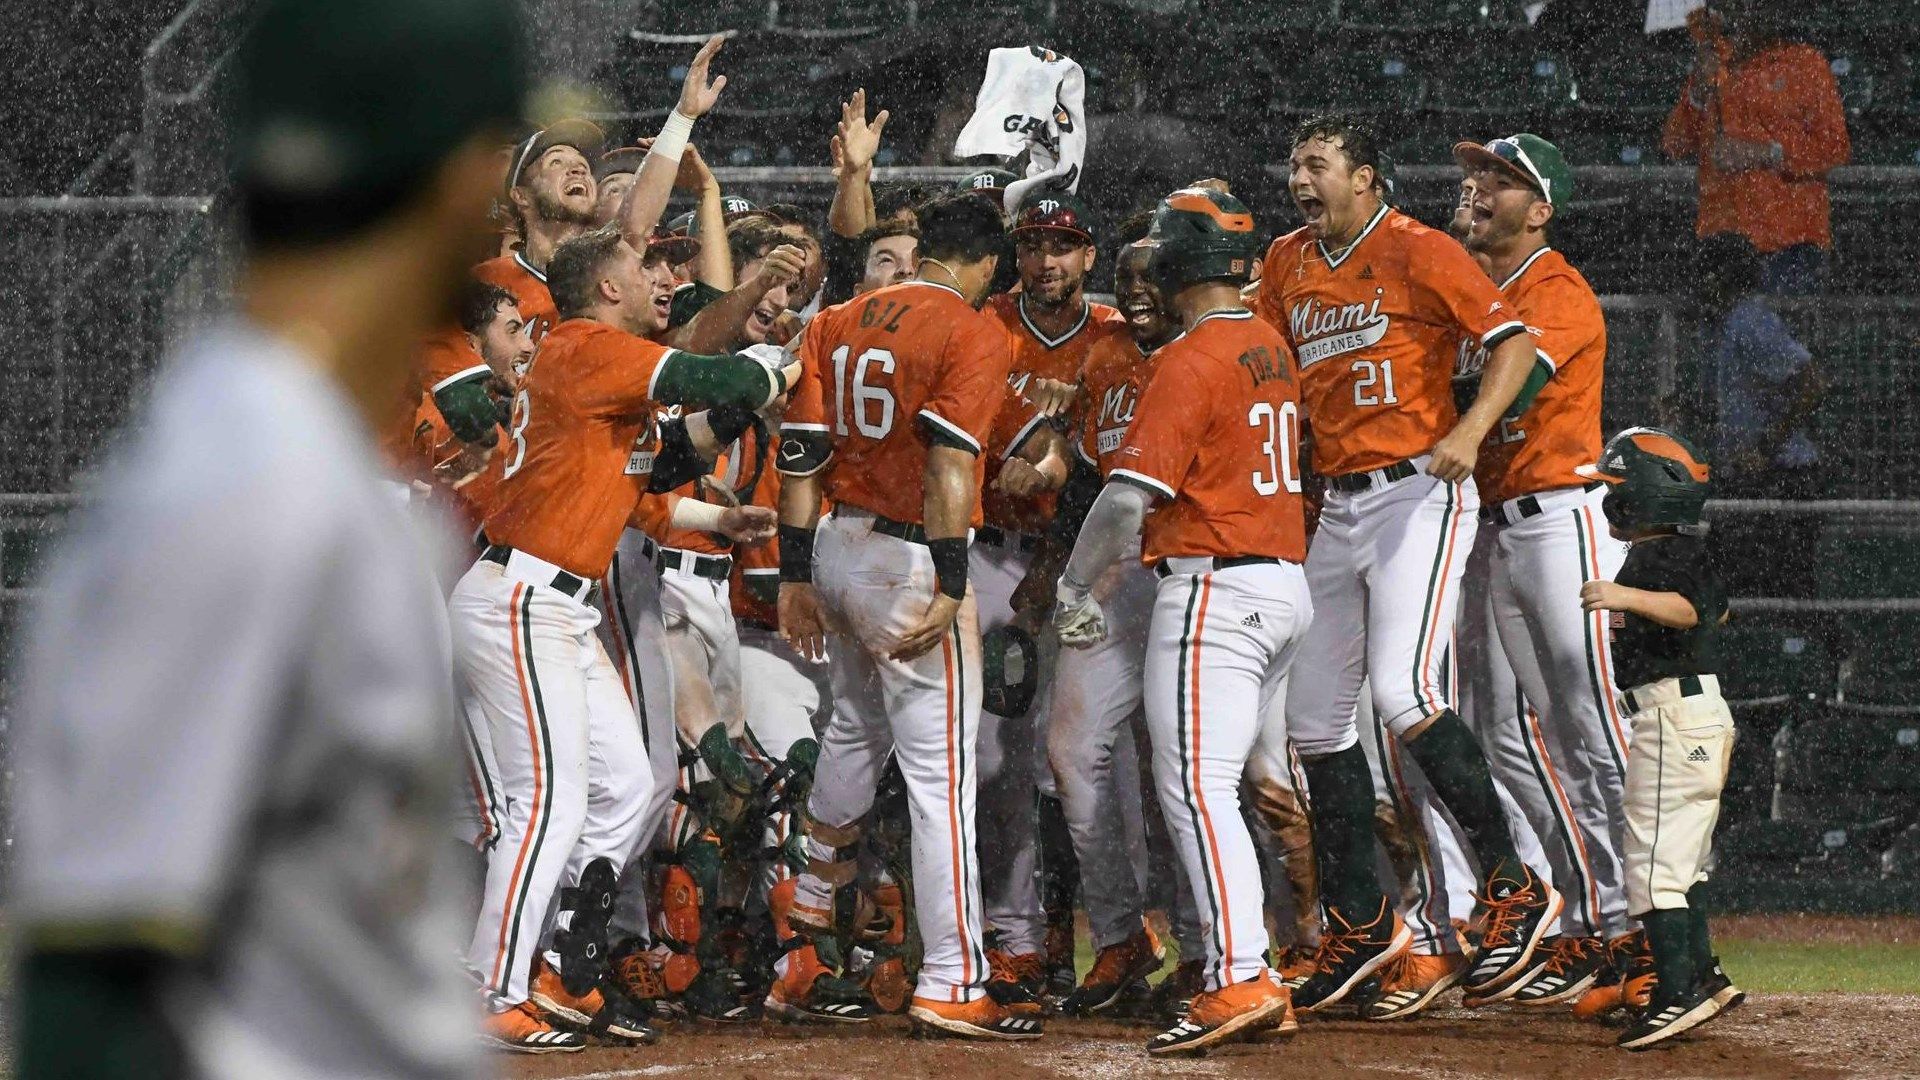 Gil Blasts Canes to Victory over USF